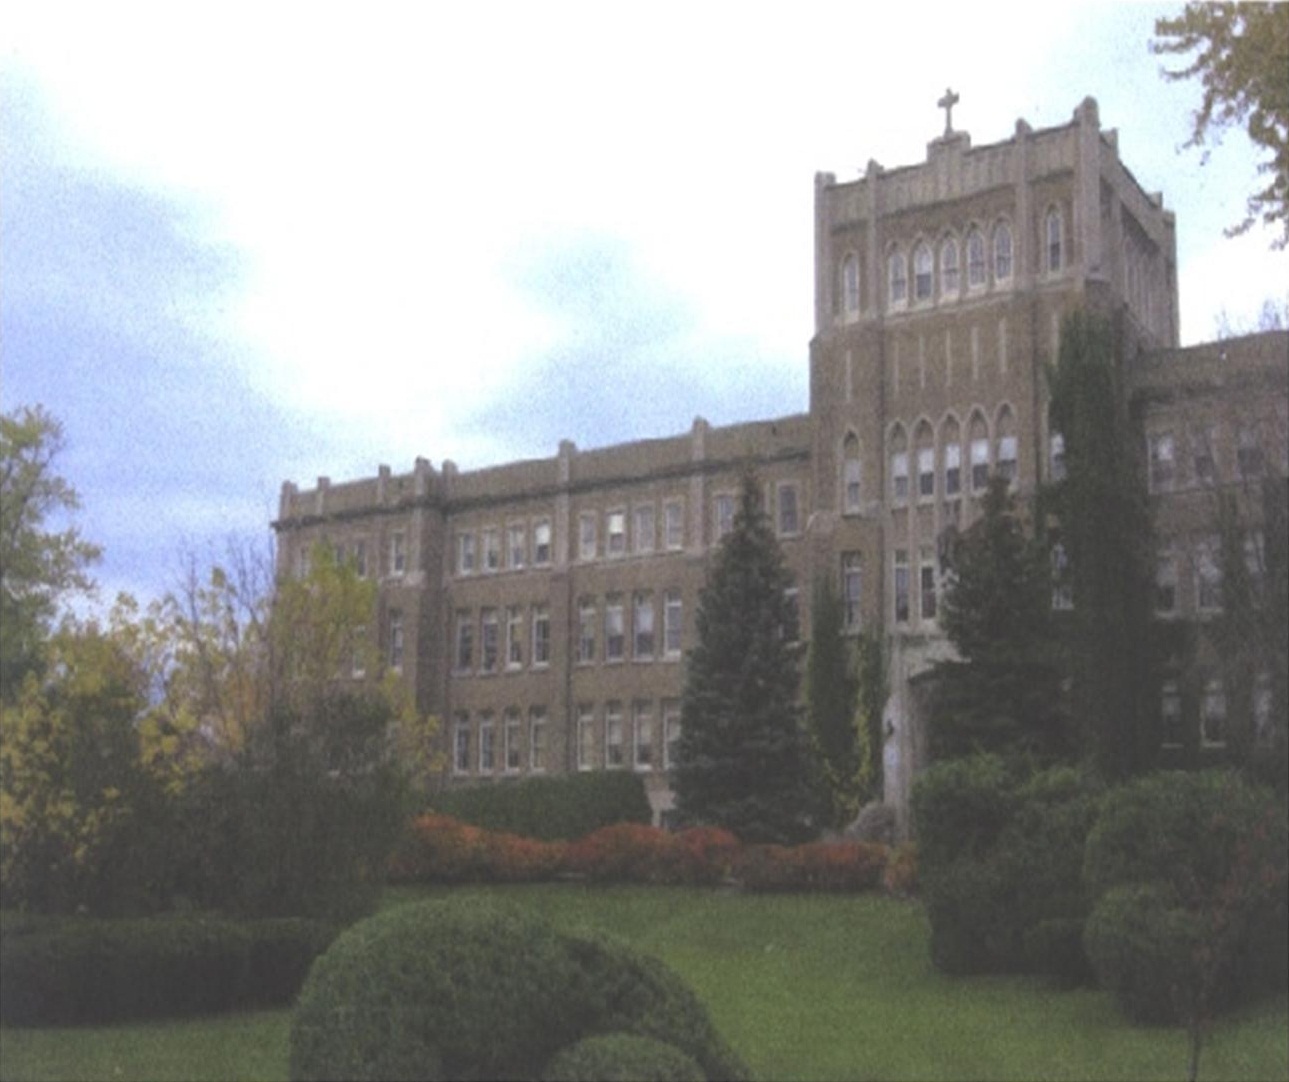 MOUNT ST. MARY'S